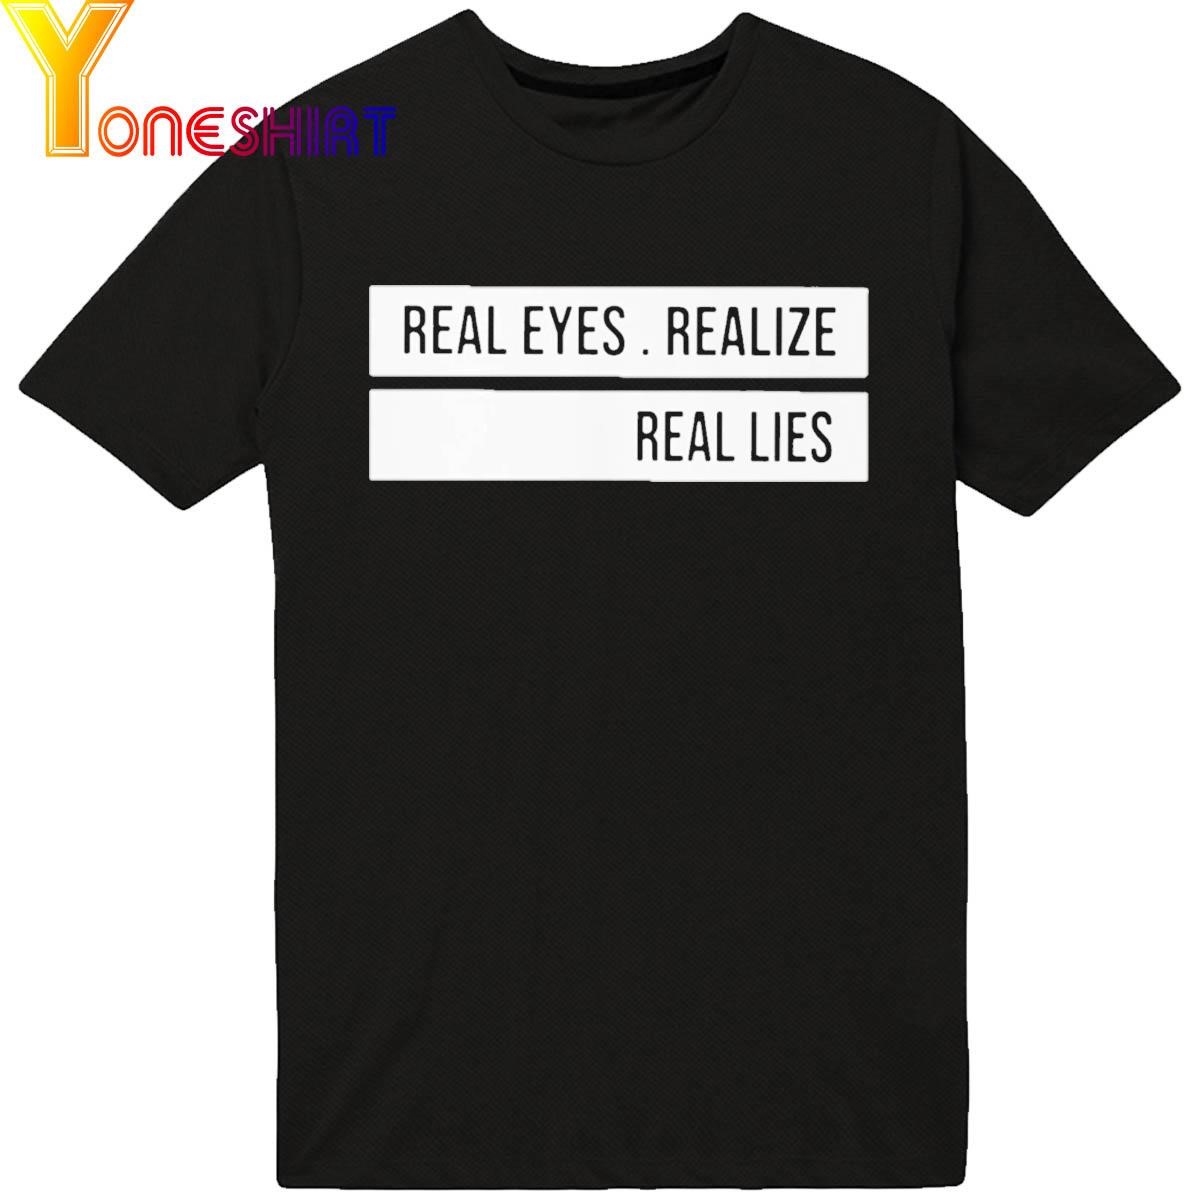 Kevin De Bruyne Real Eyes Realize Real Lies Shirt